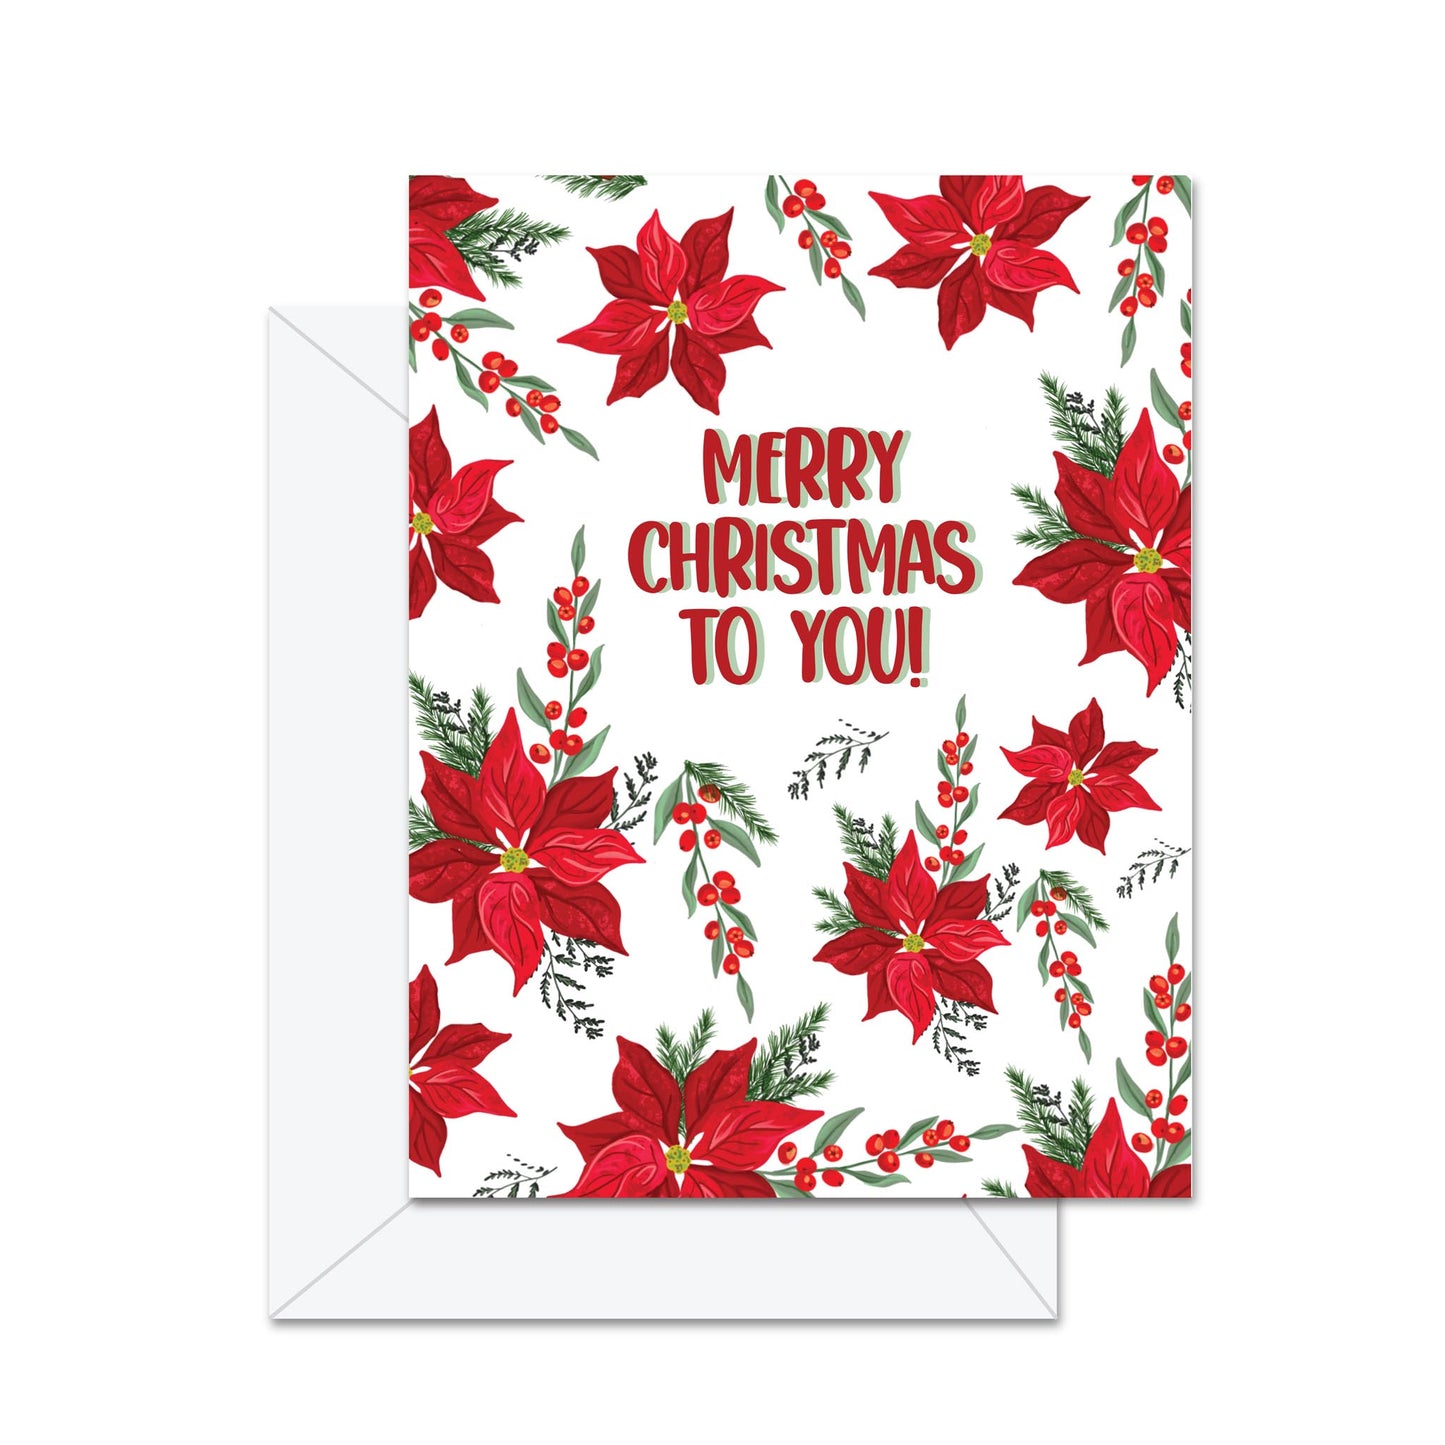 Merry Christmas To You - Greeting Card